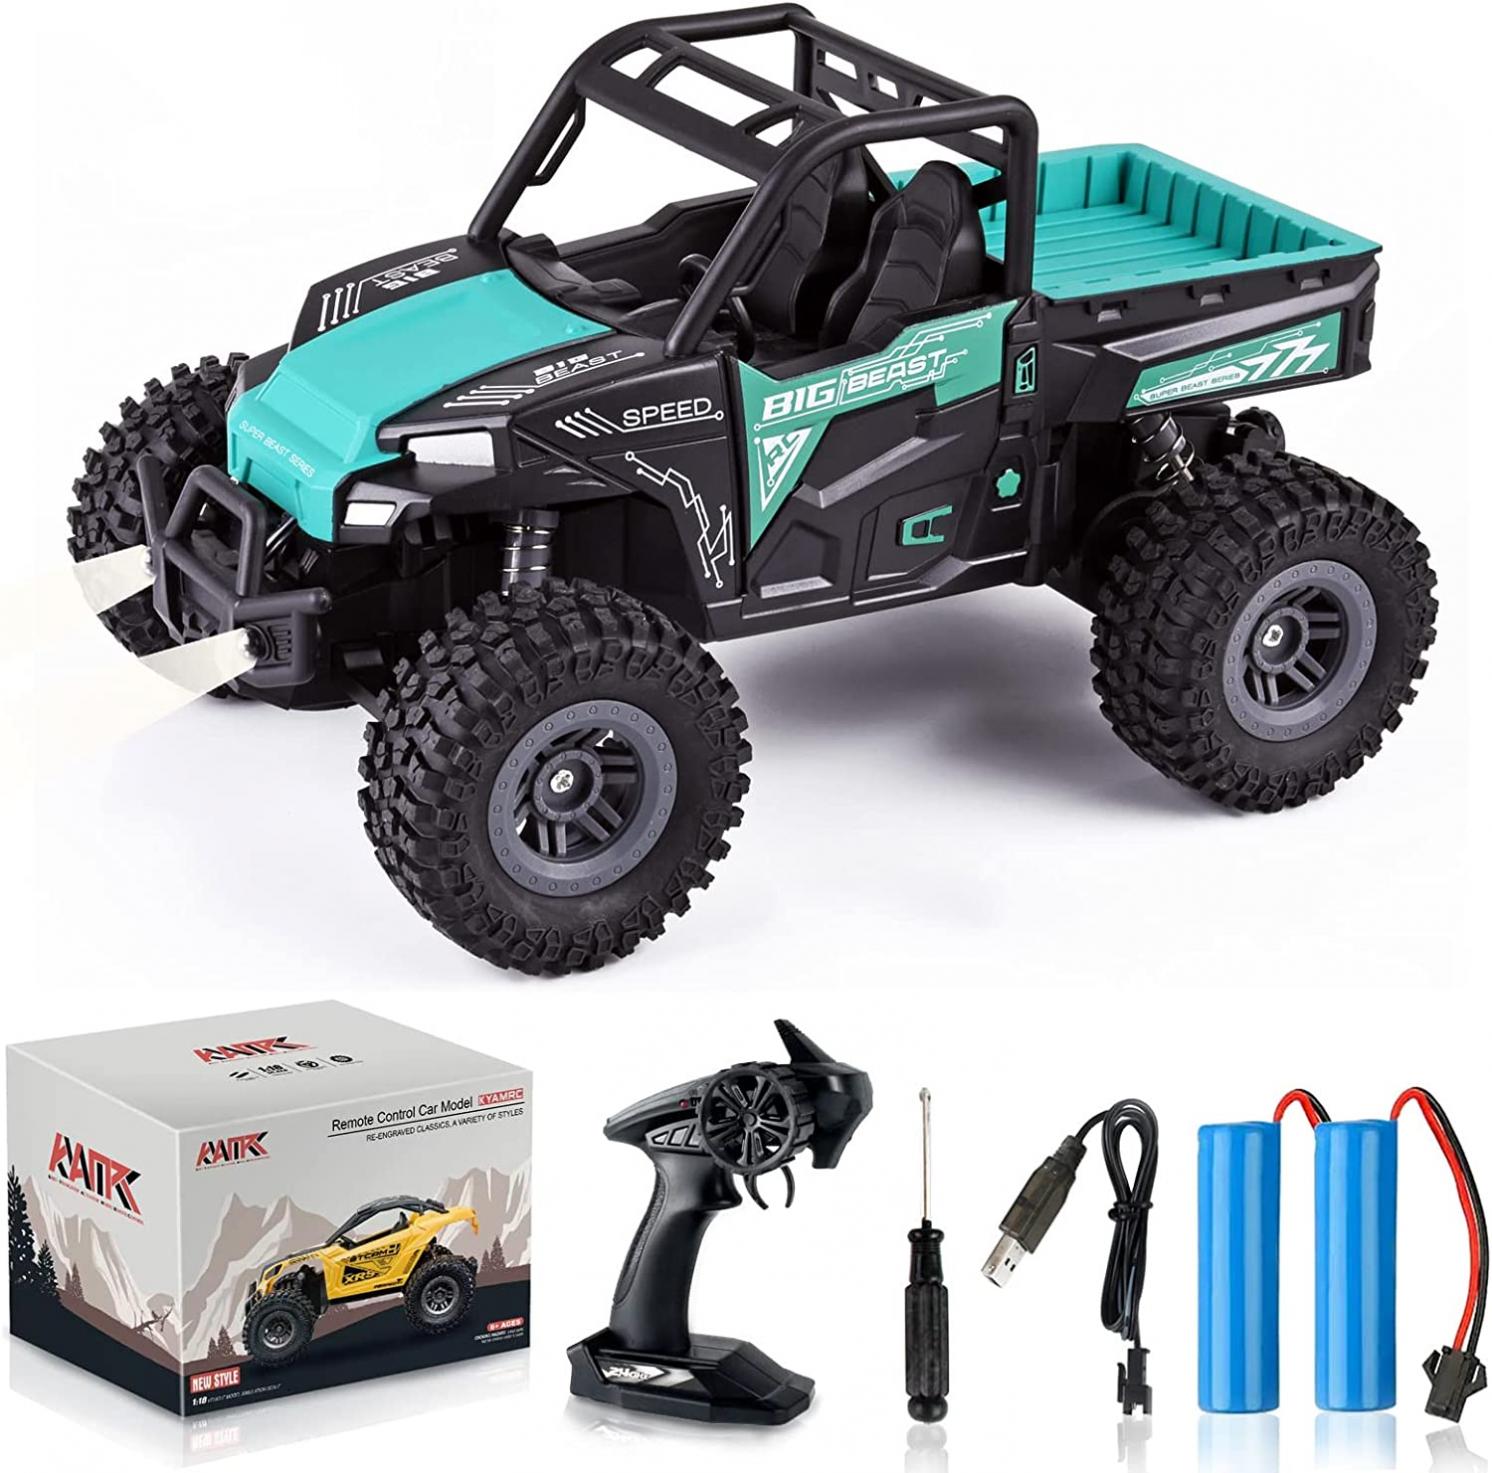 Desdoni RC Car 1:18 Scale 18KM/H High Speed Remote Control Cars Off-Road Vehicle with LED Lights 2.4GHz 2WD RC Truck Monster Rock Crawler Car Toys Gifts for Boys Girls Teens Adults